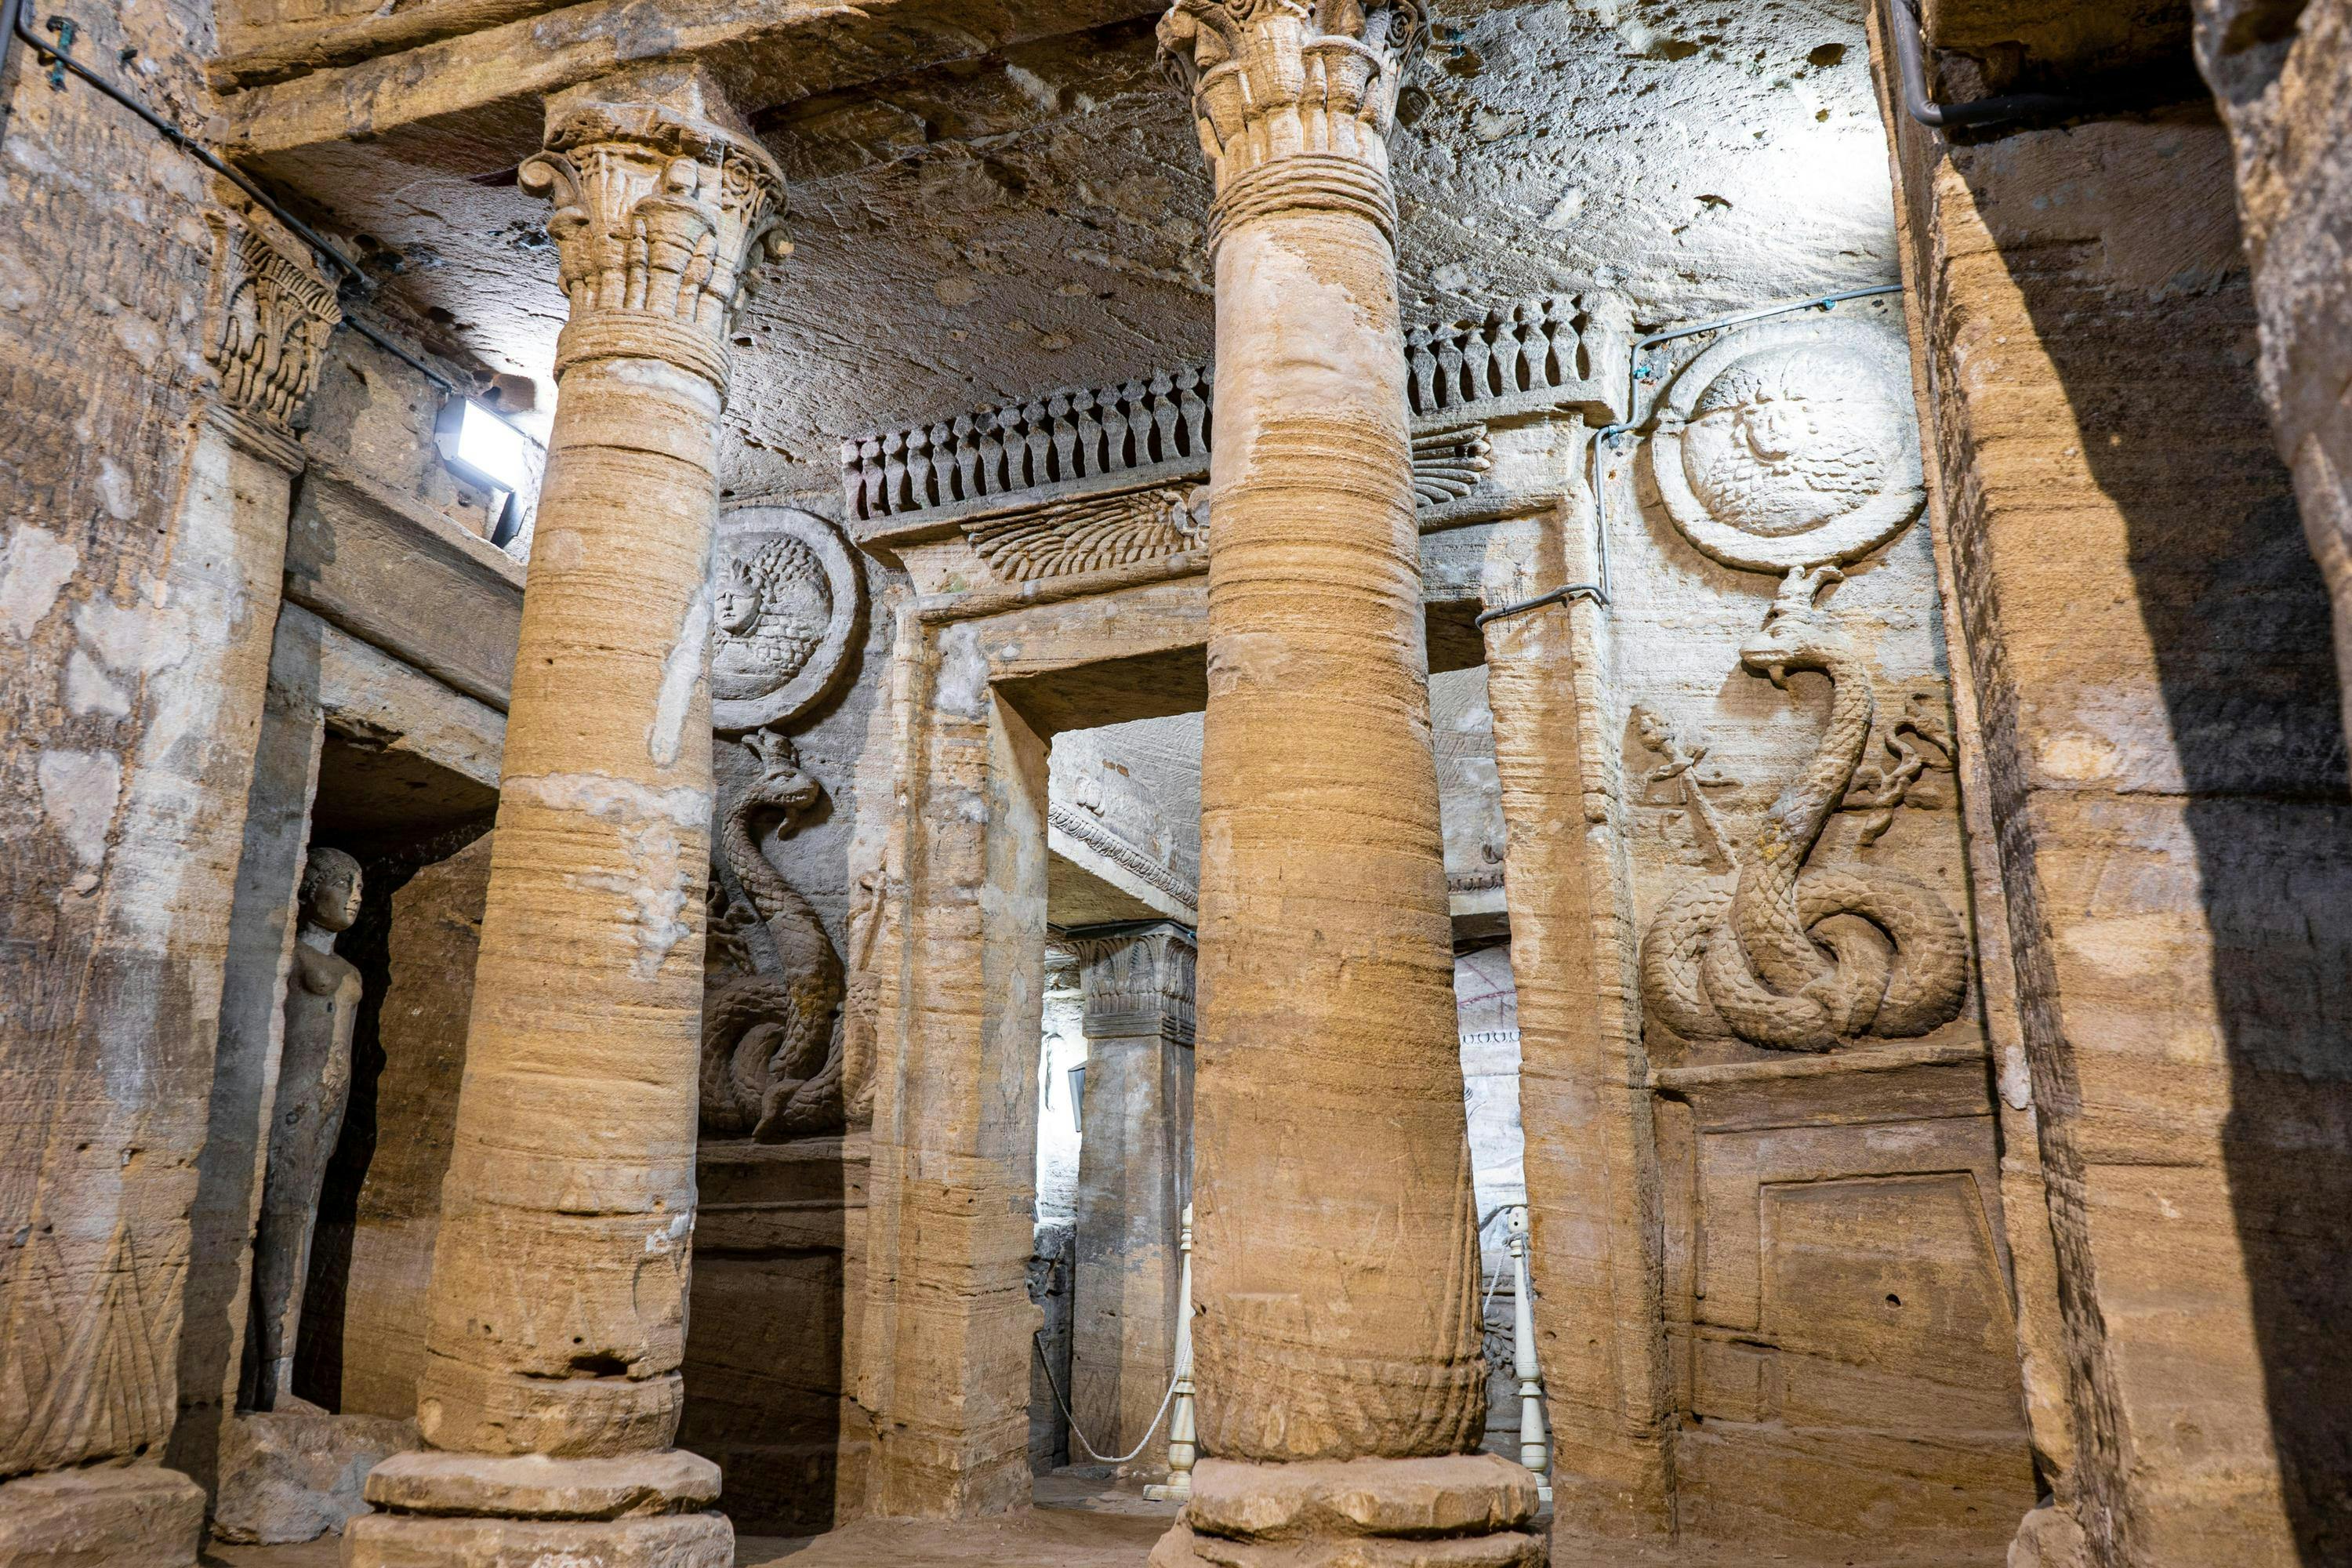 A inside view of the catacombs of Kom El Shoqafa, a historical archaeological site located in Alexandria, Egypt